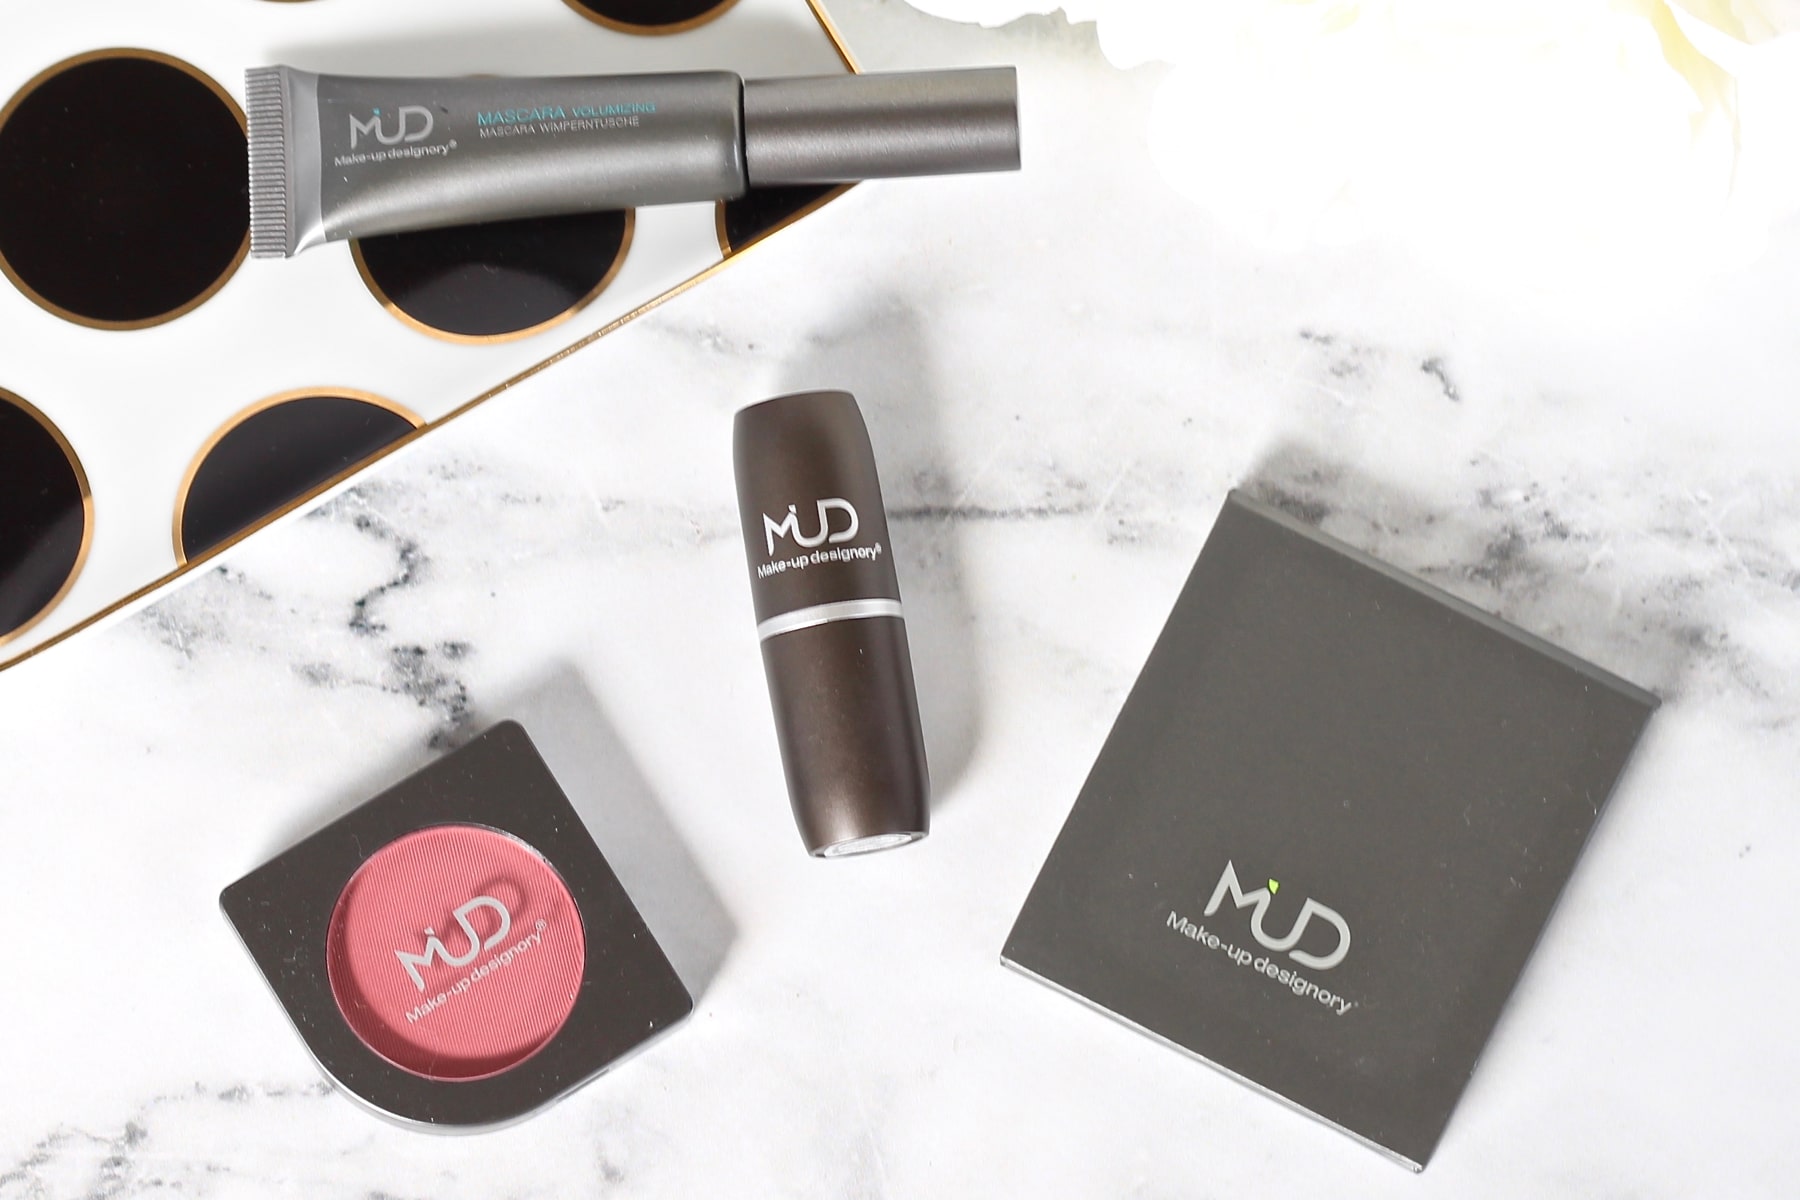 omhyggeligt ærme varme MUD Cosmetics (Make-up Designory) Natural Day Look